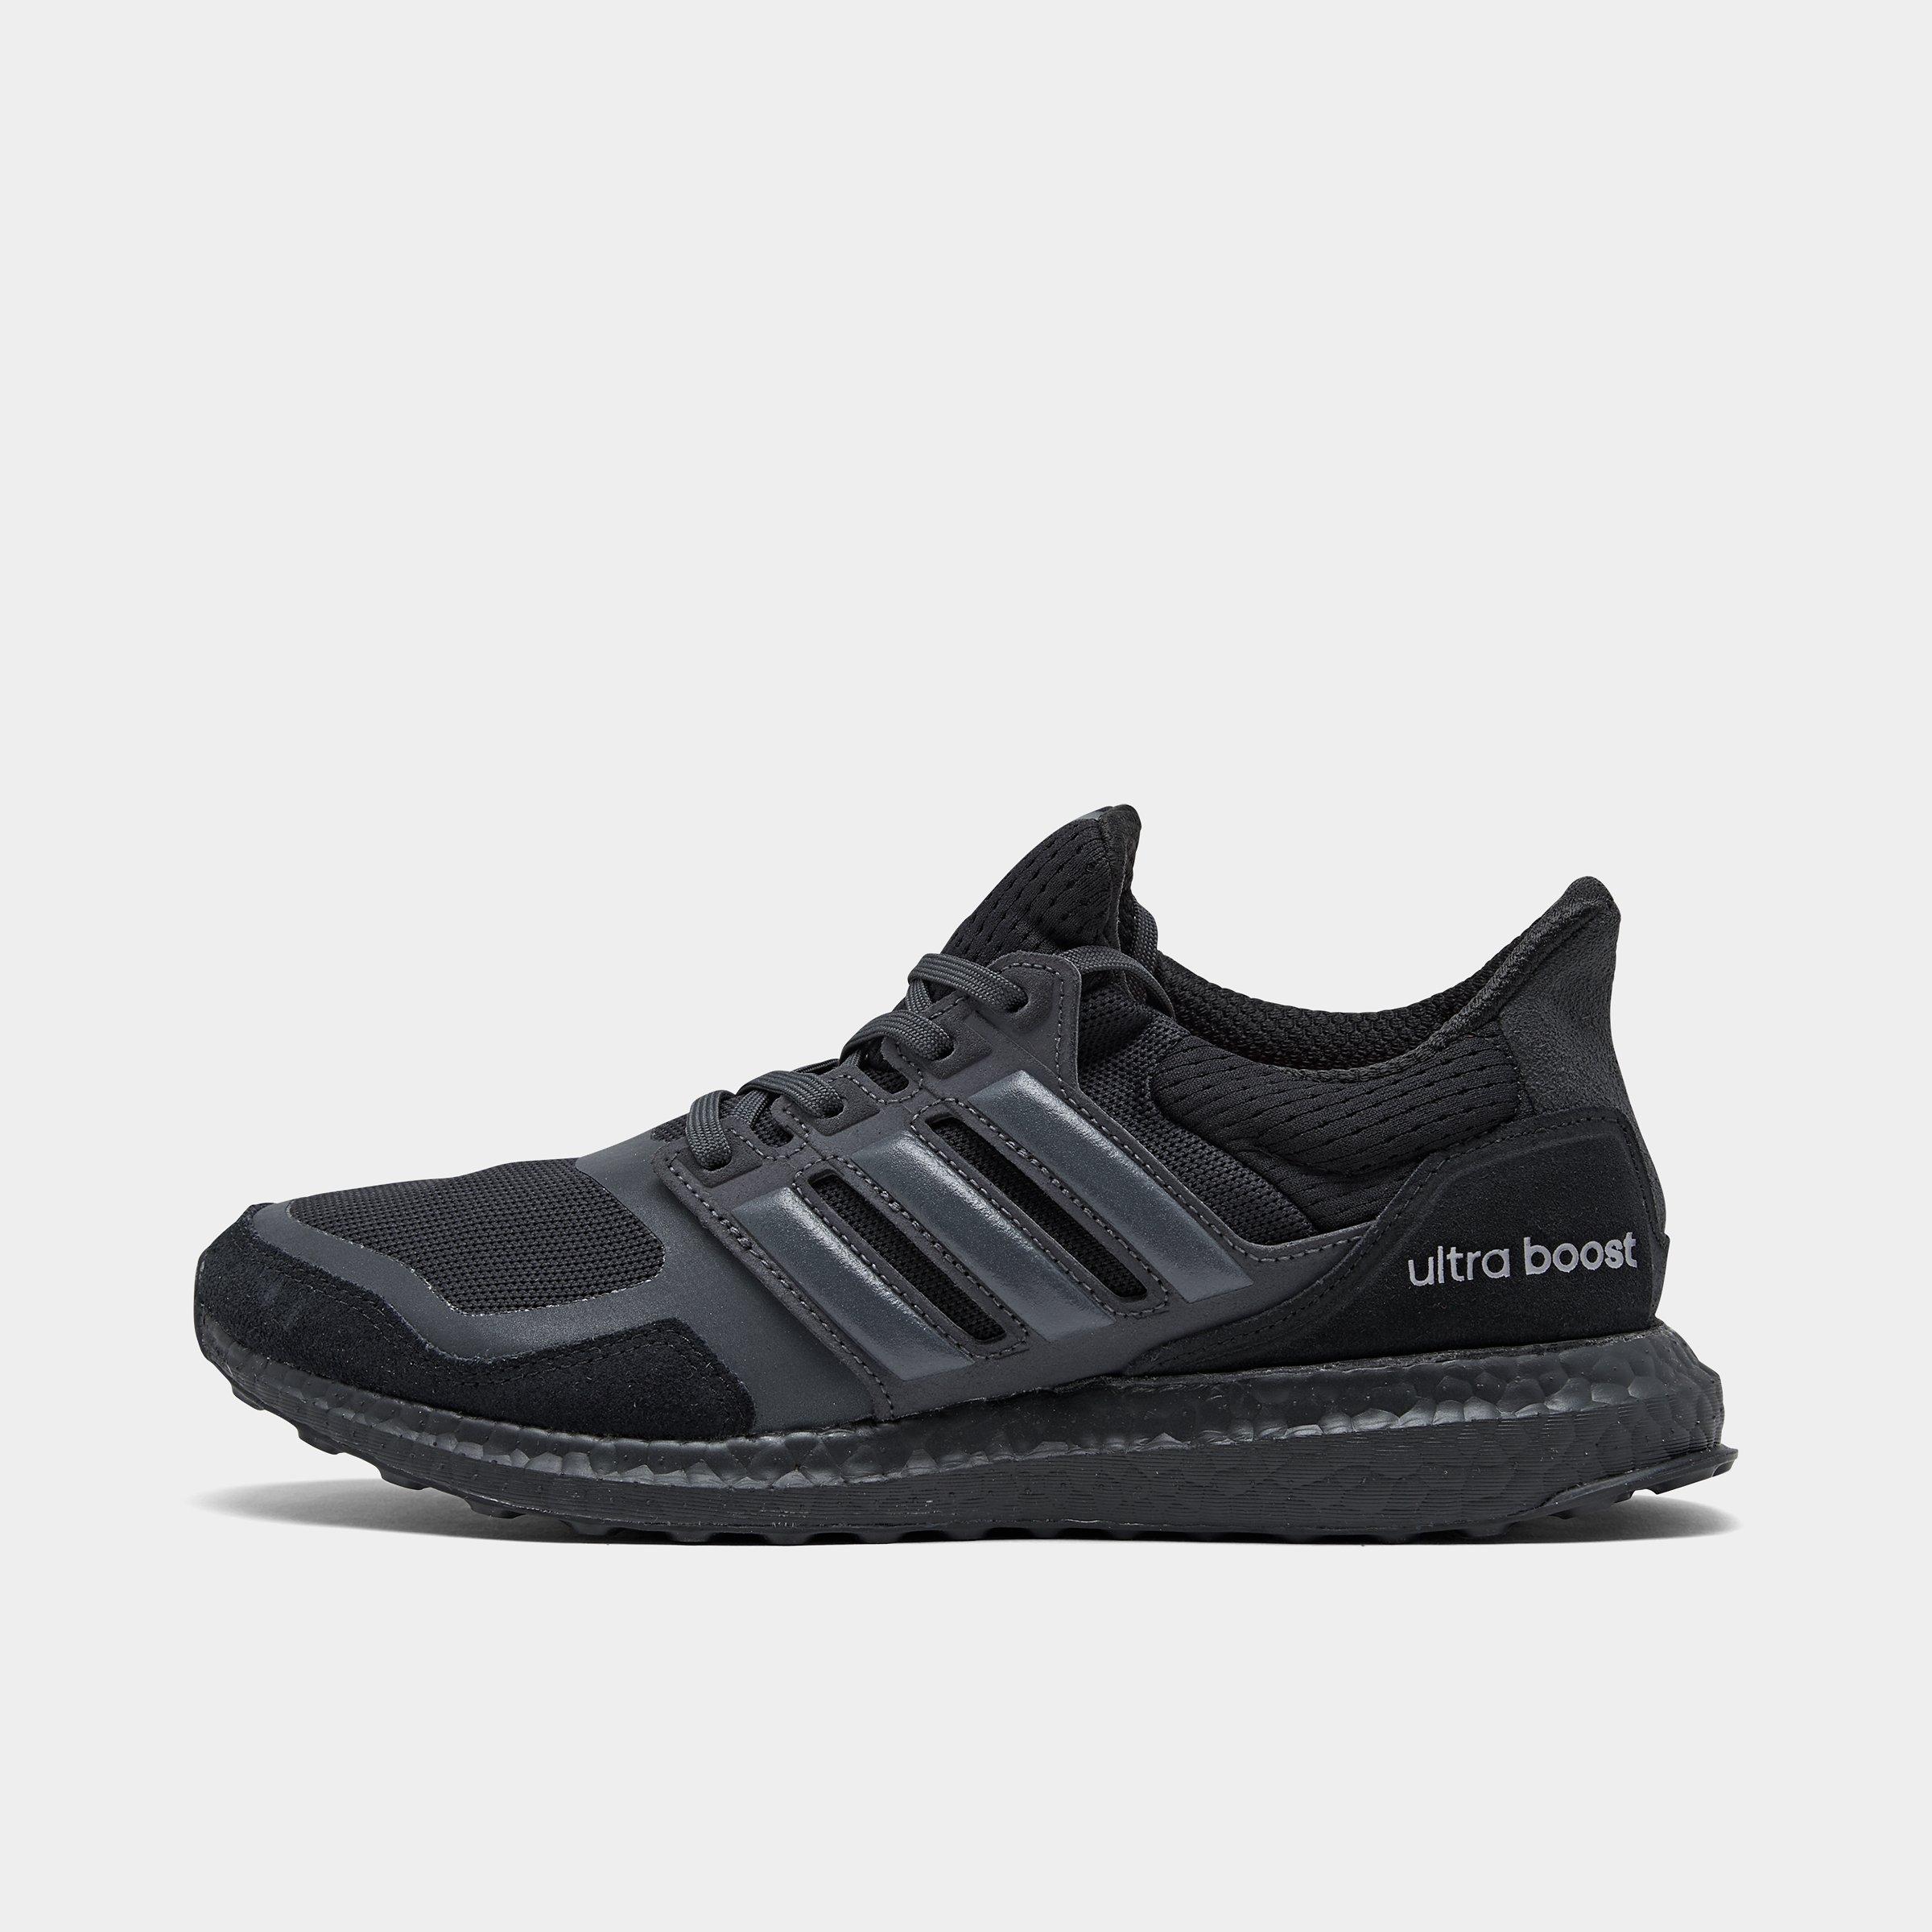 ultra boost 1.0 size guide